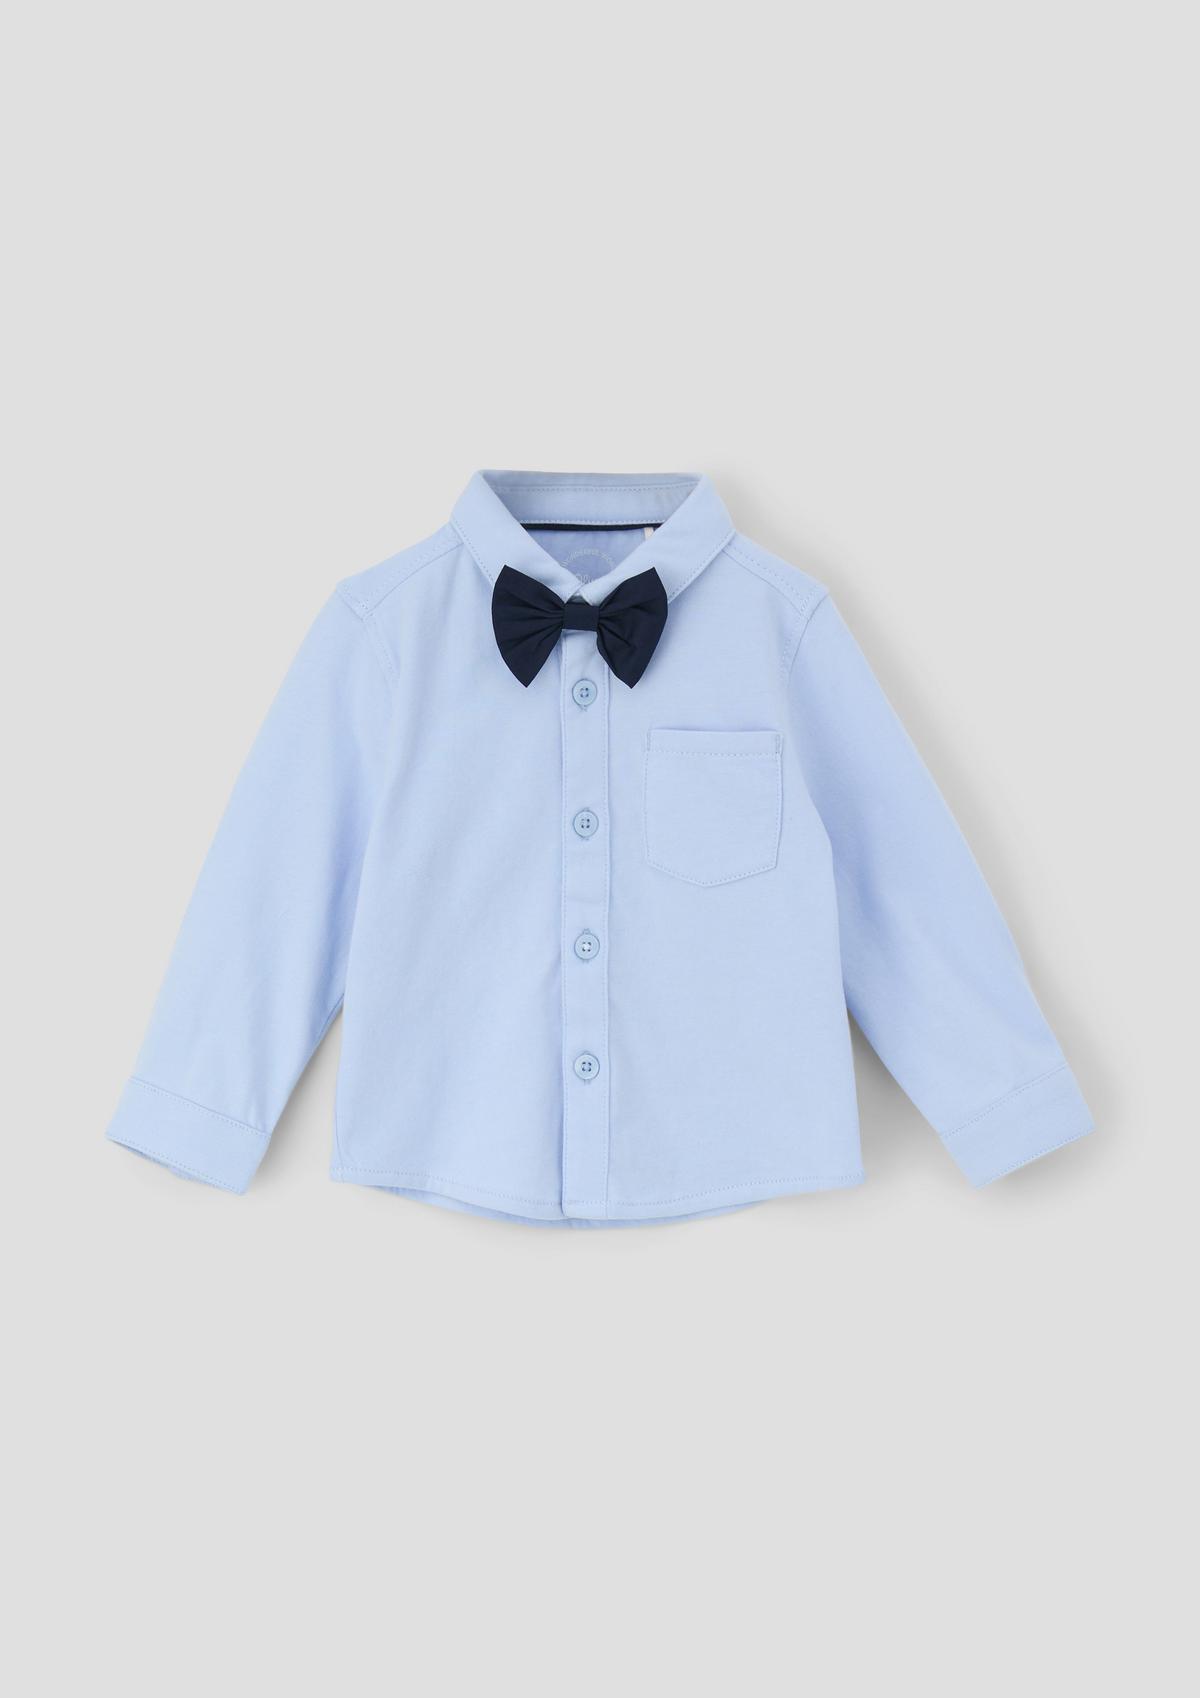 s.Oliver Regular fit: Shirt with a detachable bow tie